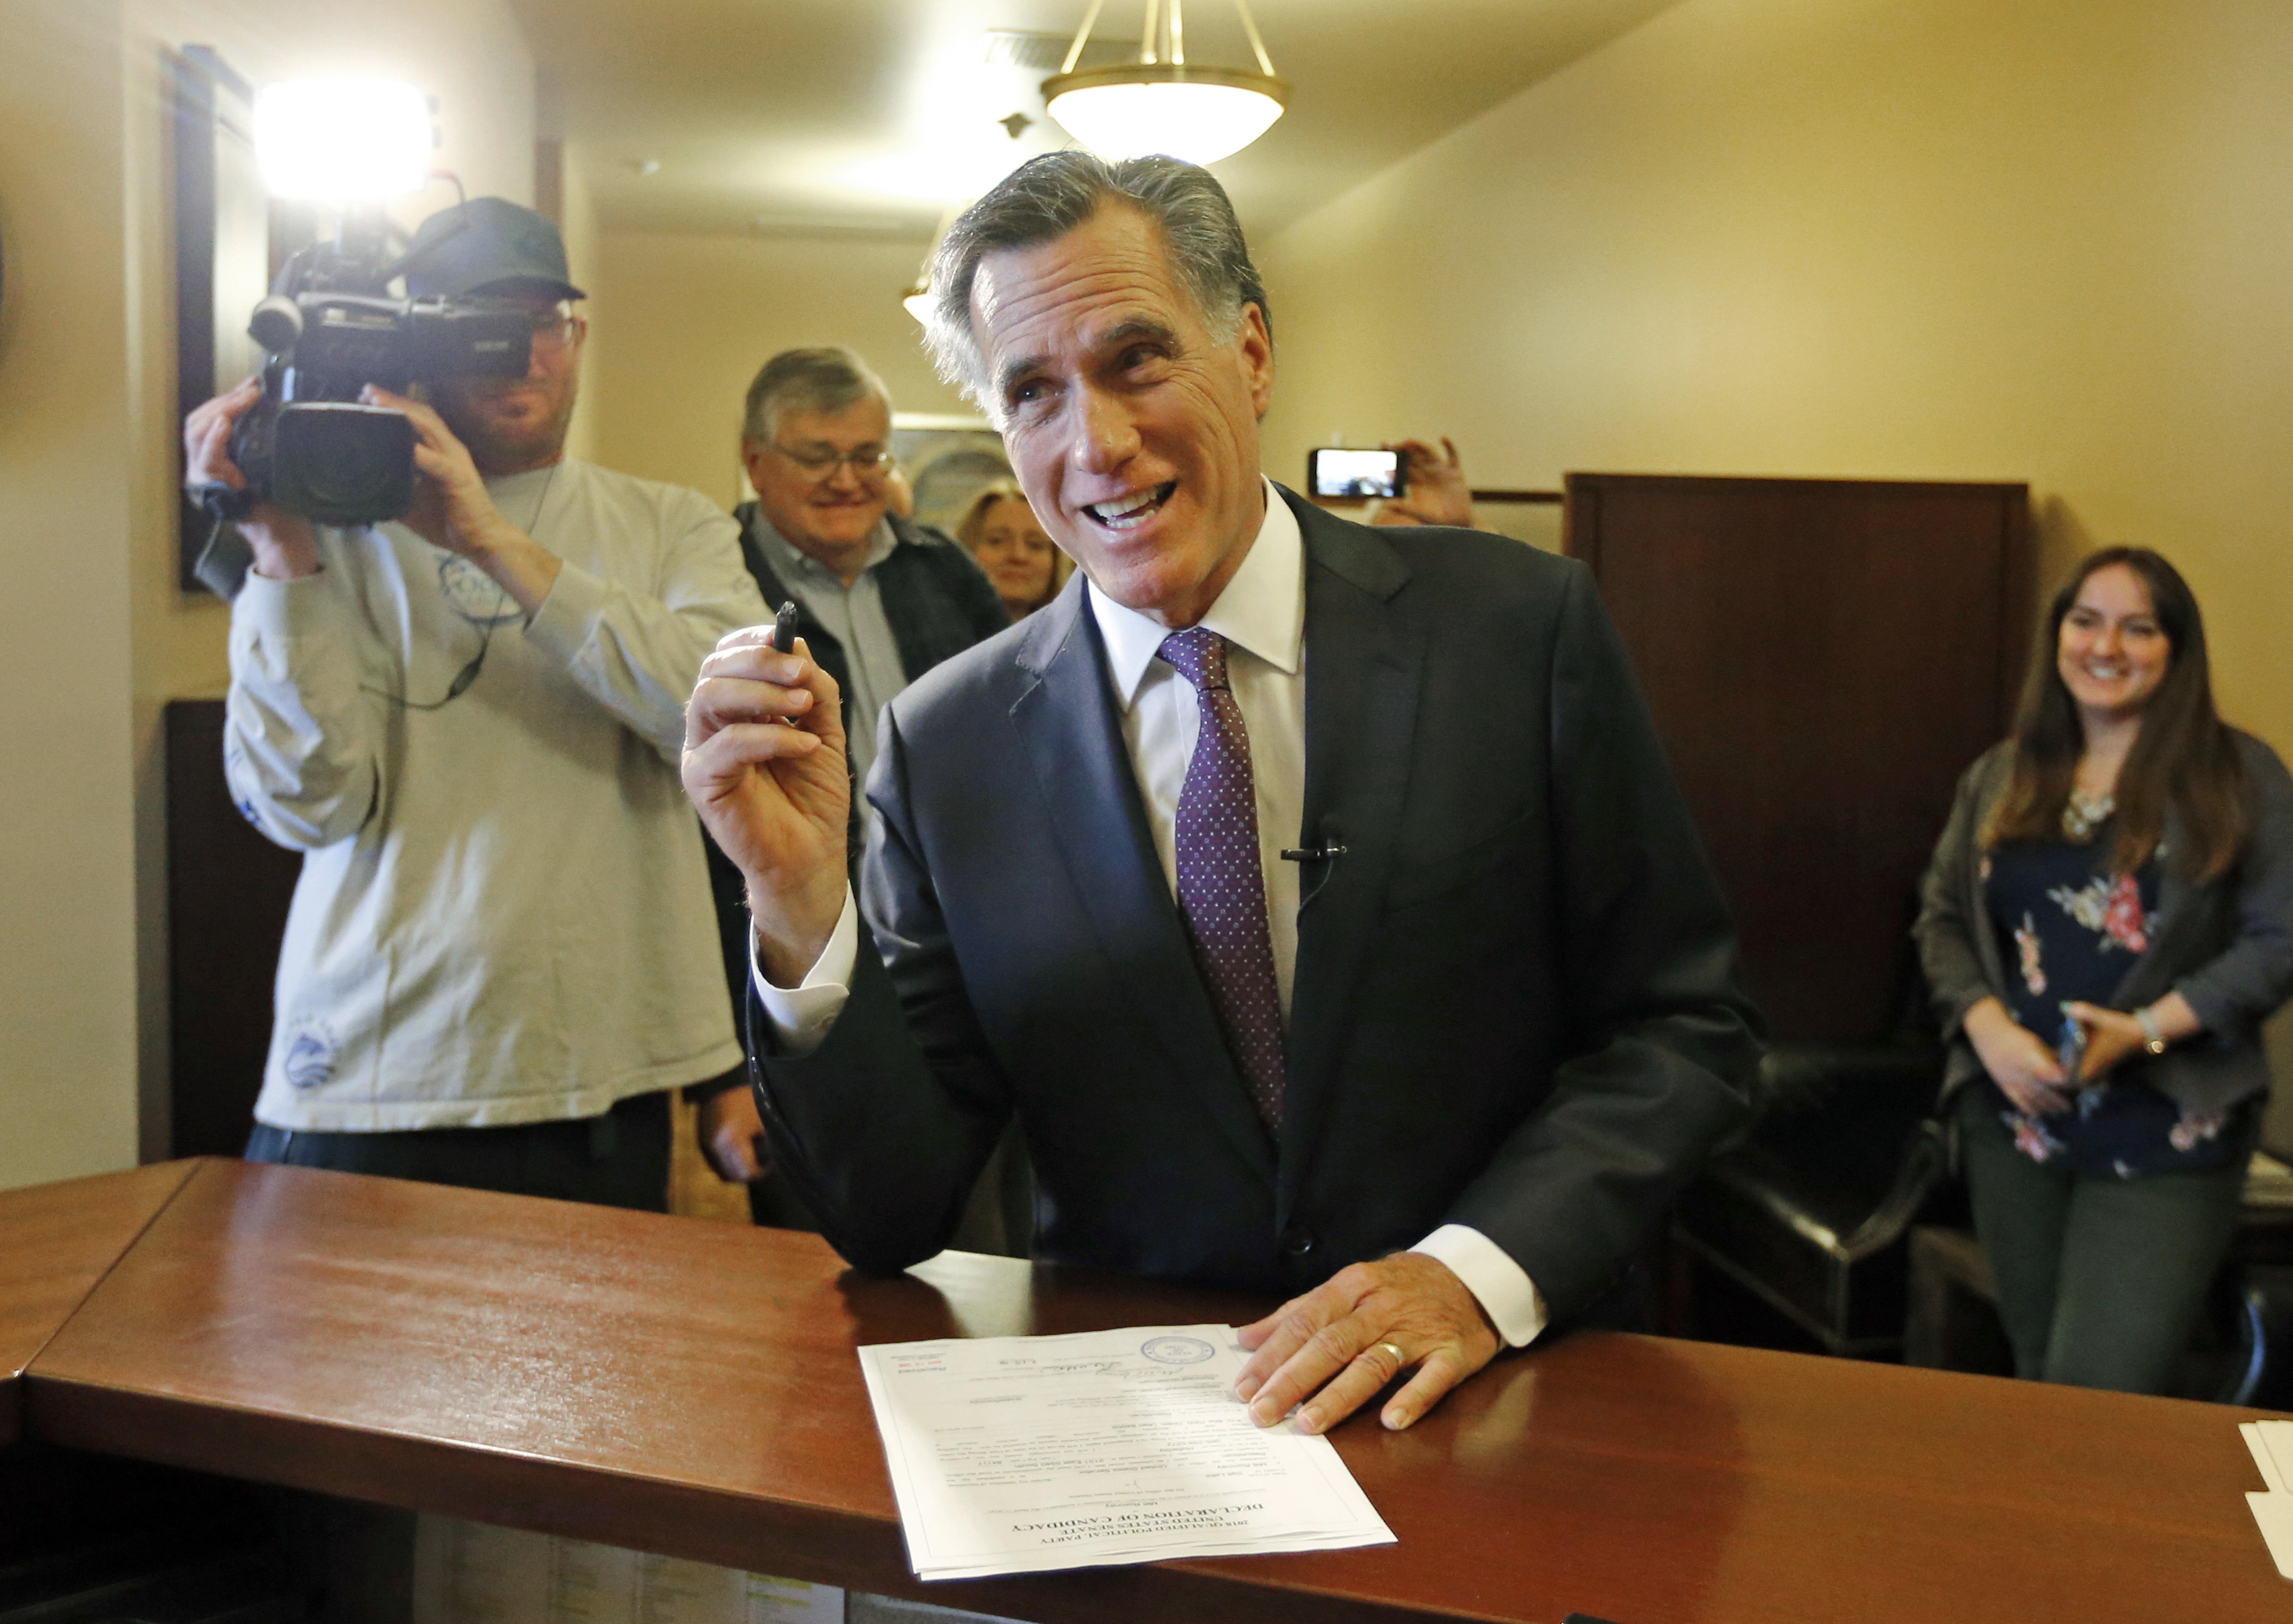 Mitt Romney comes in second place at Utah GOP convention, forced into primary - CBS News5400 x 3825